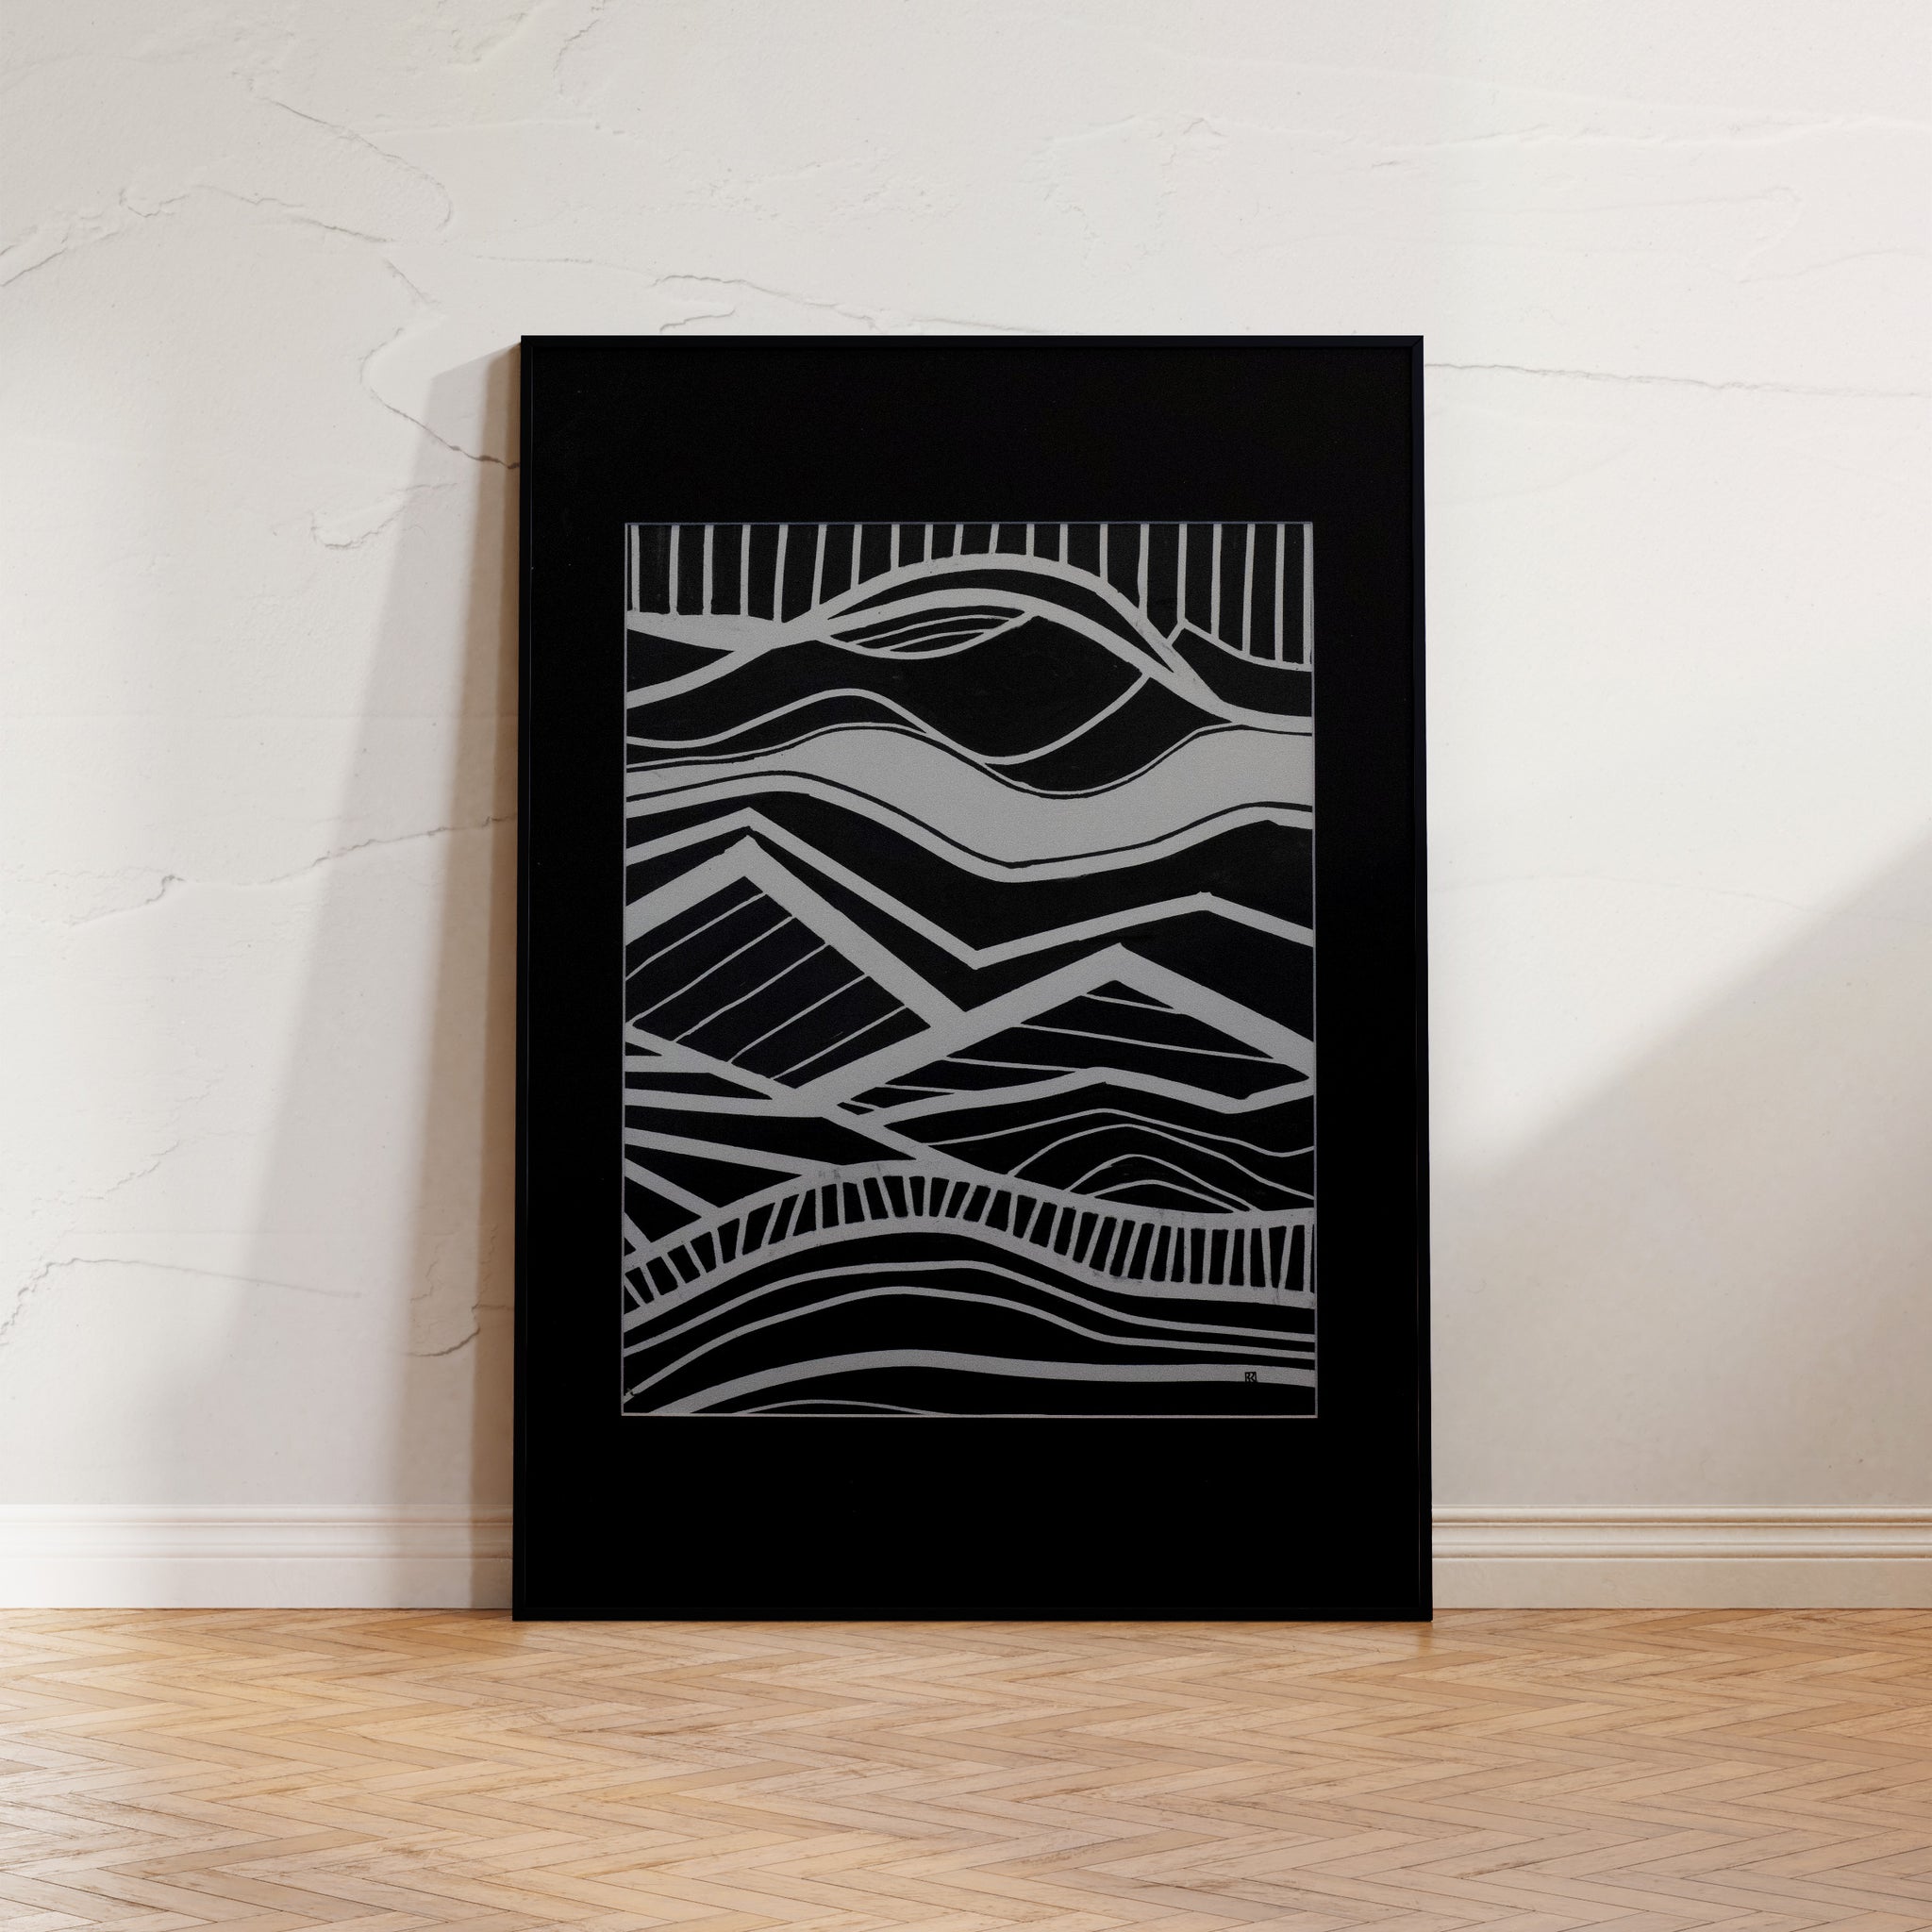 "Winding Ascent", A minimalist line drawing capturing the abstract beauty of a coastal mountain landscape in black and white.